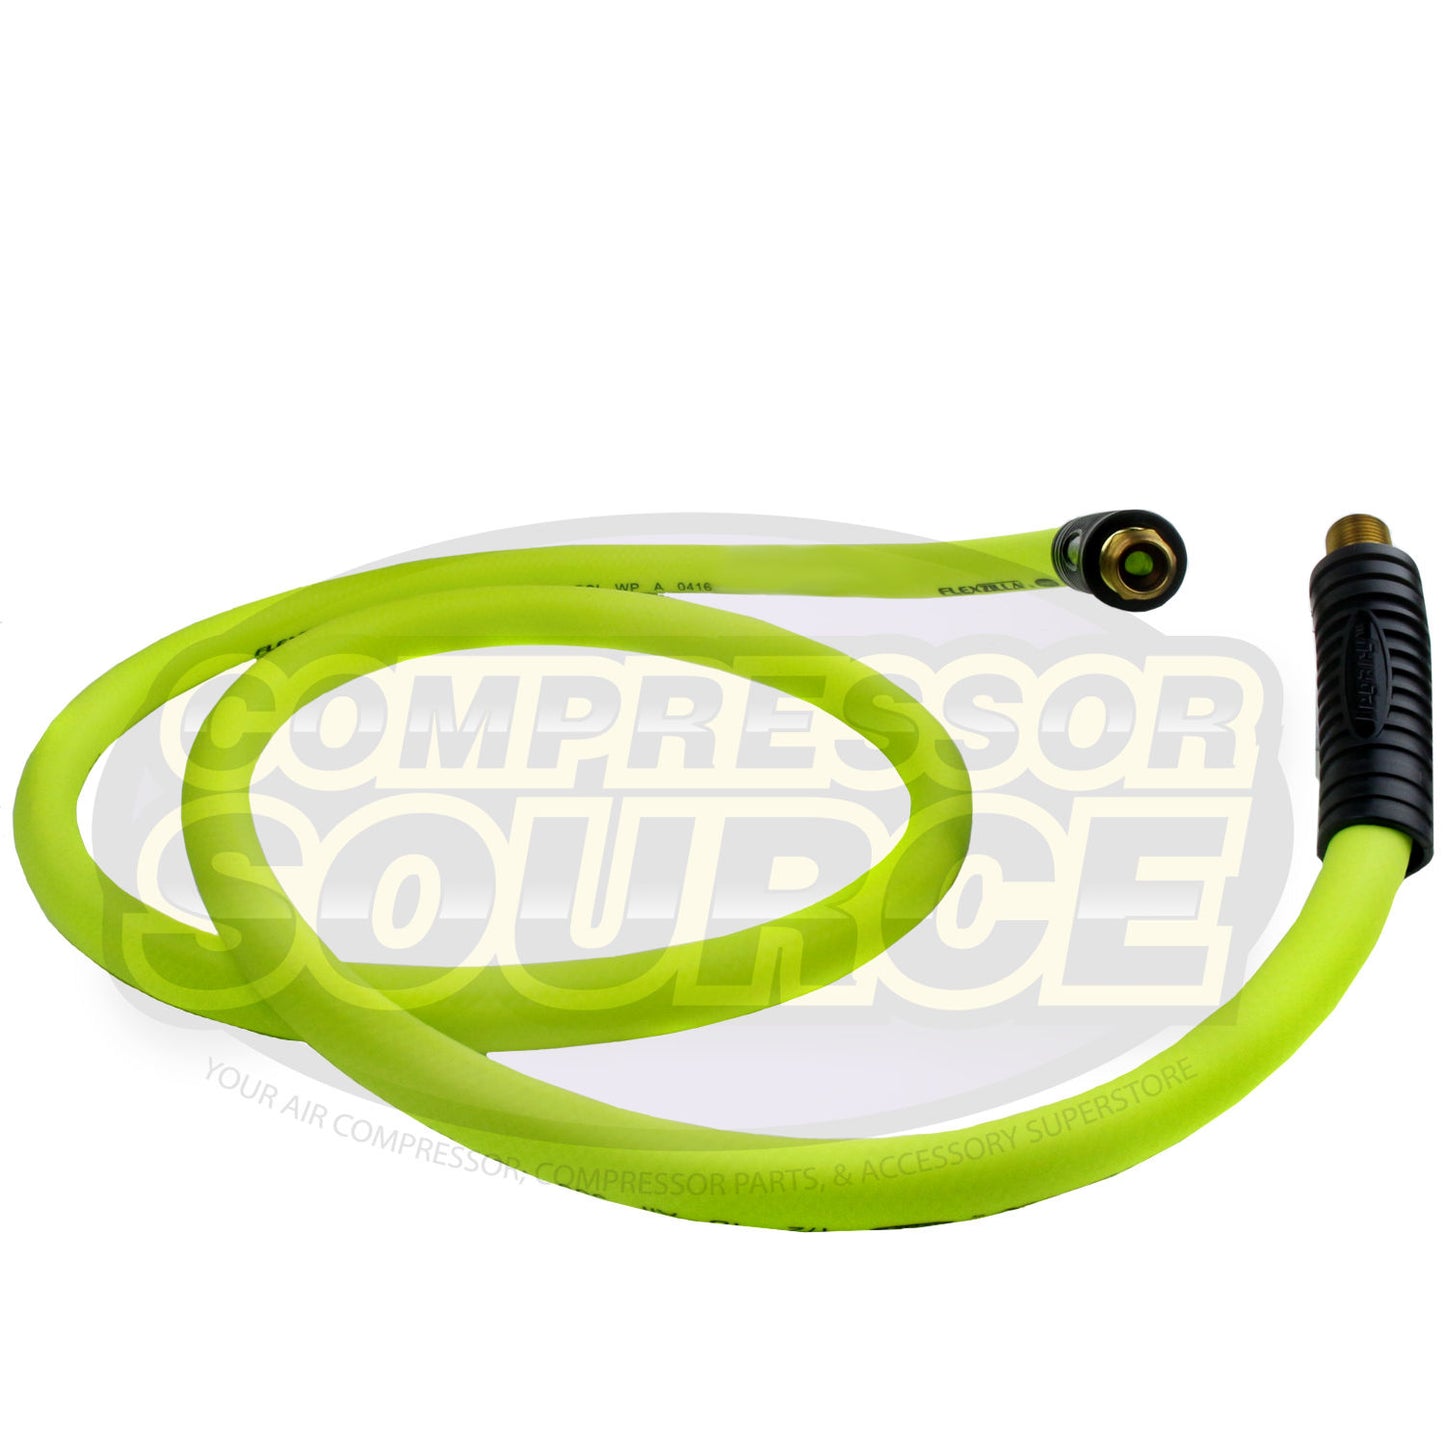 New Flexzilla 1/2" x 6' FT Air Hose Whip With 1/2' MNPT Swivel HFZ1206YW4S